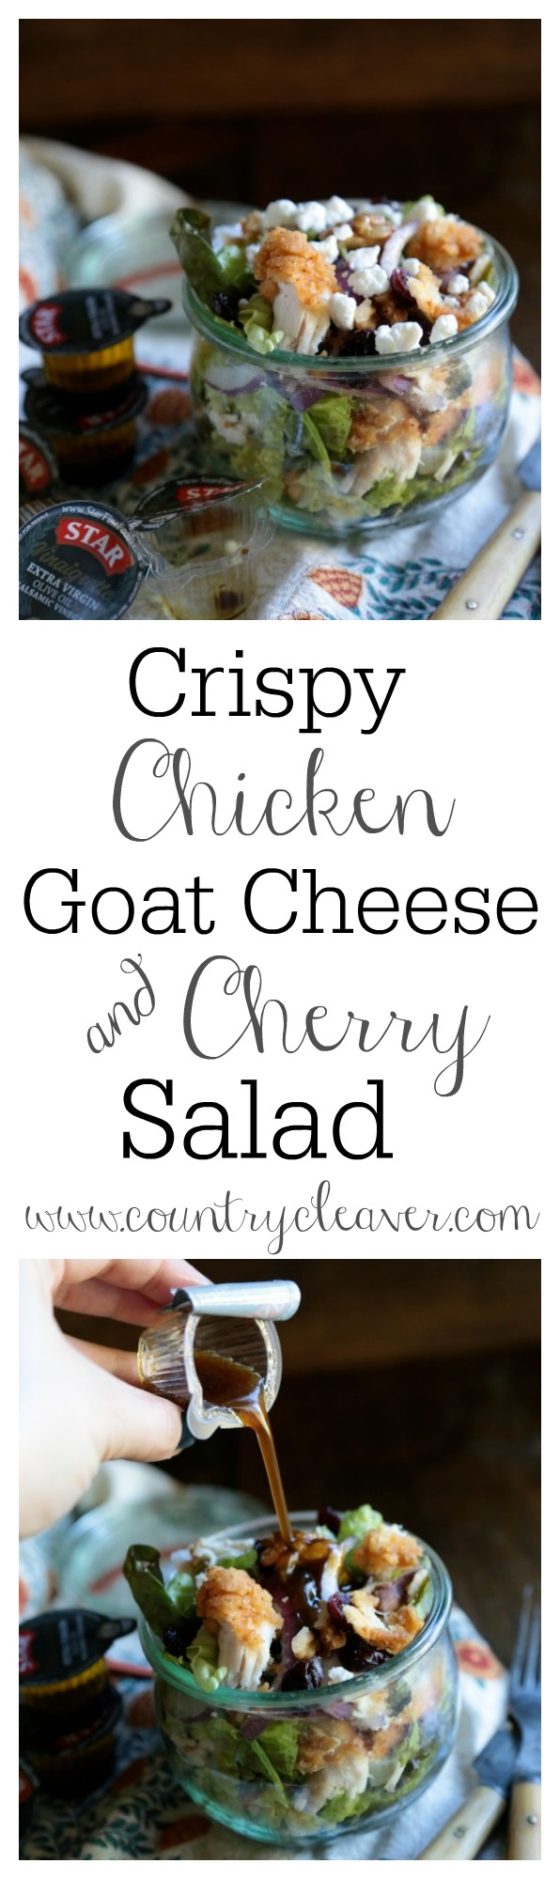 Crispy Chicken Goat Cheese and Cherry Salad- homemadehome.com